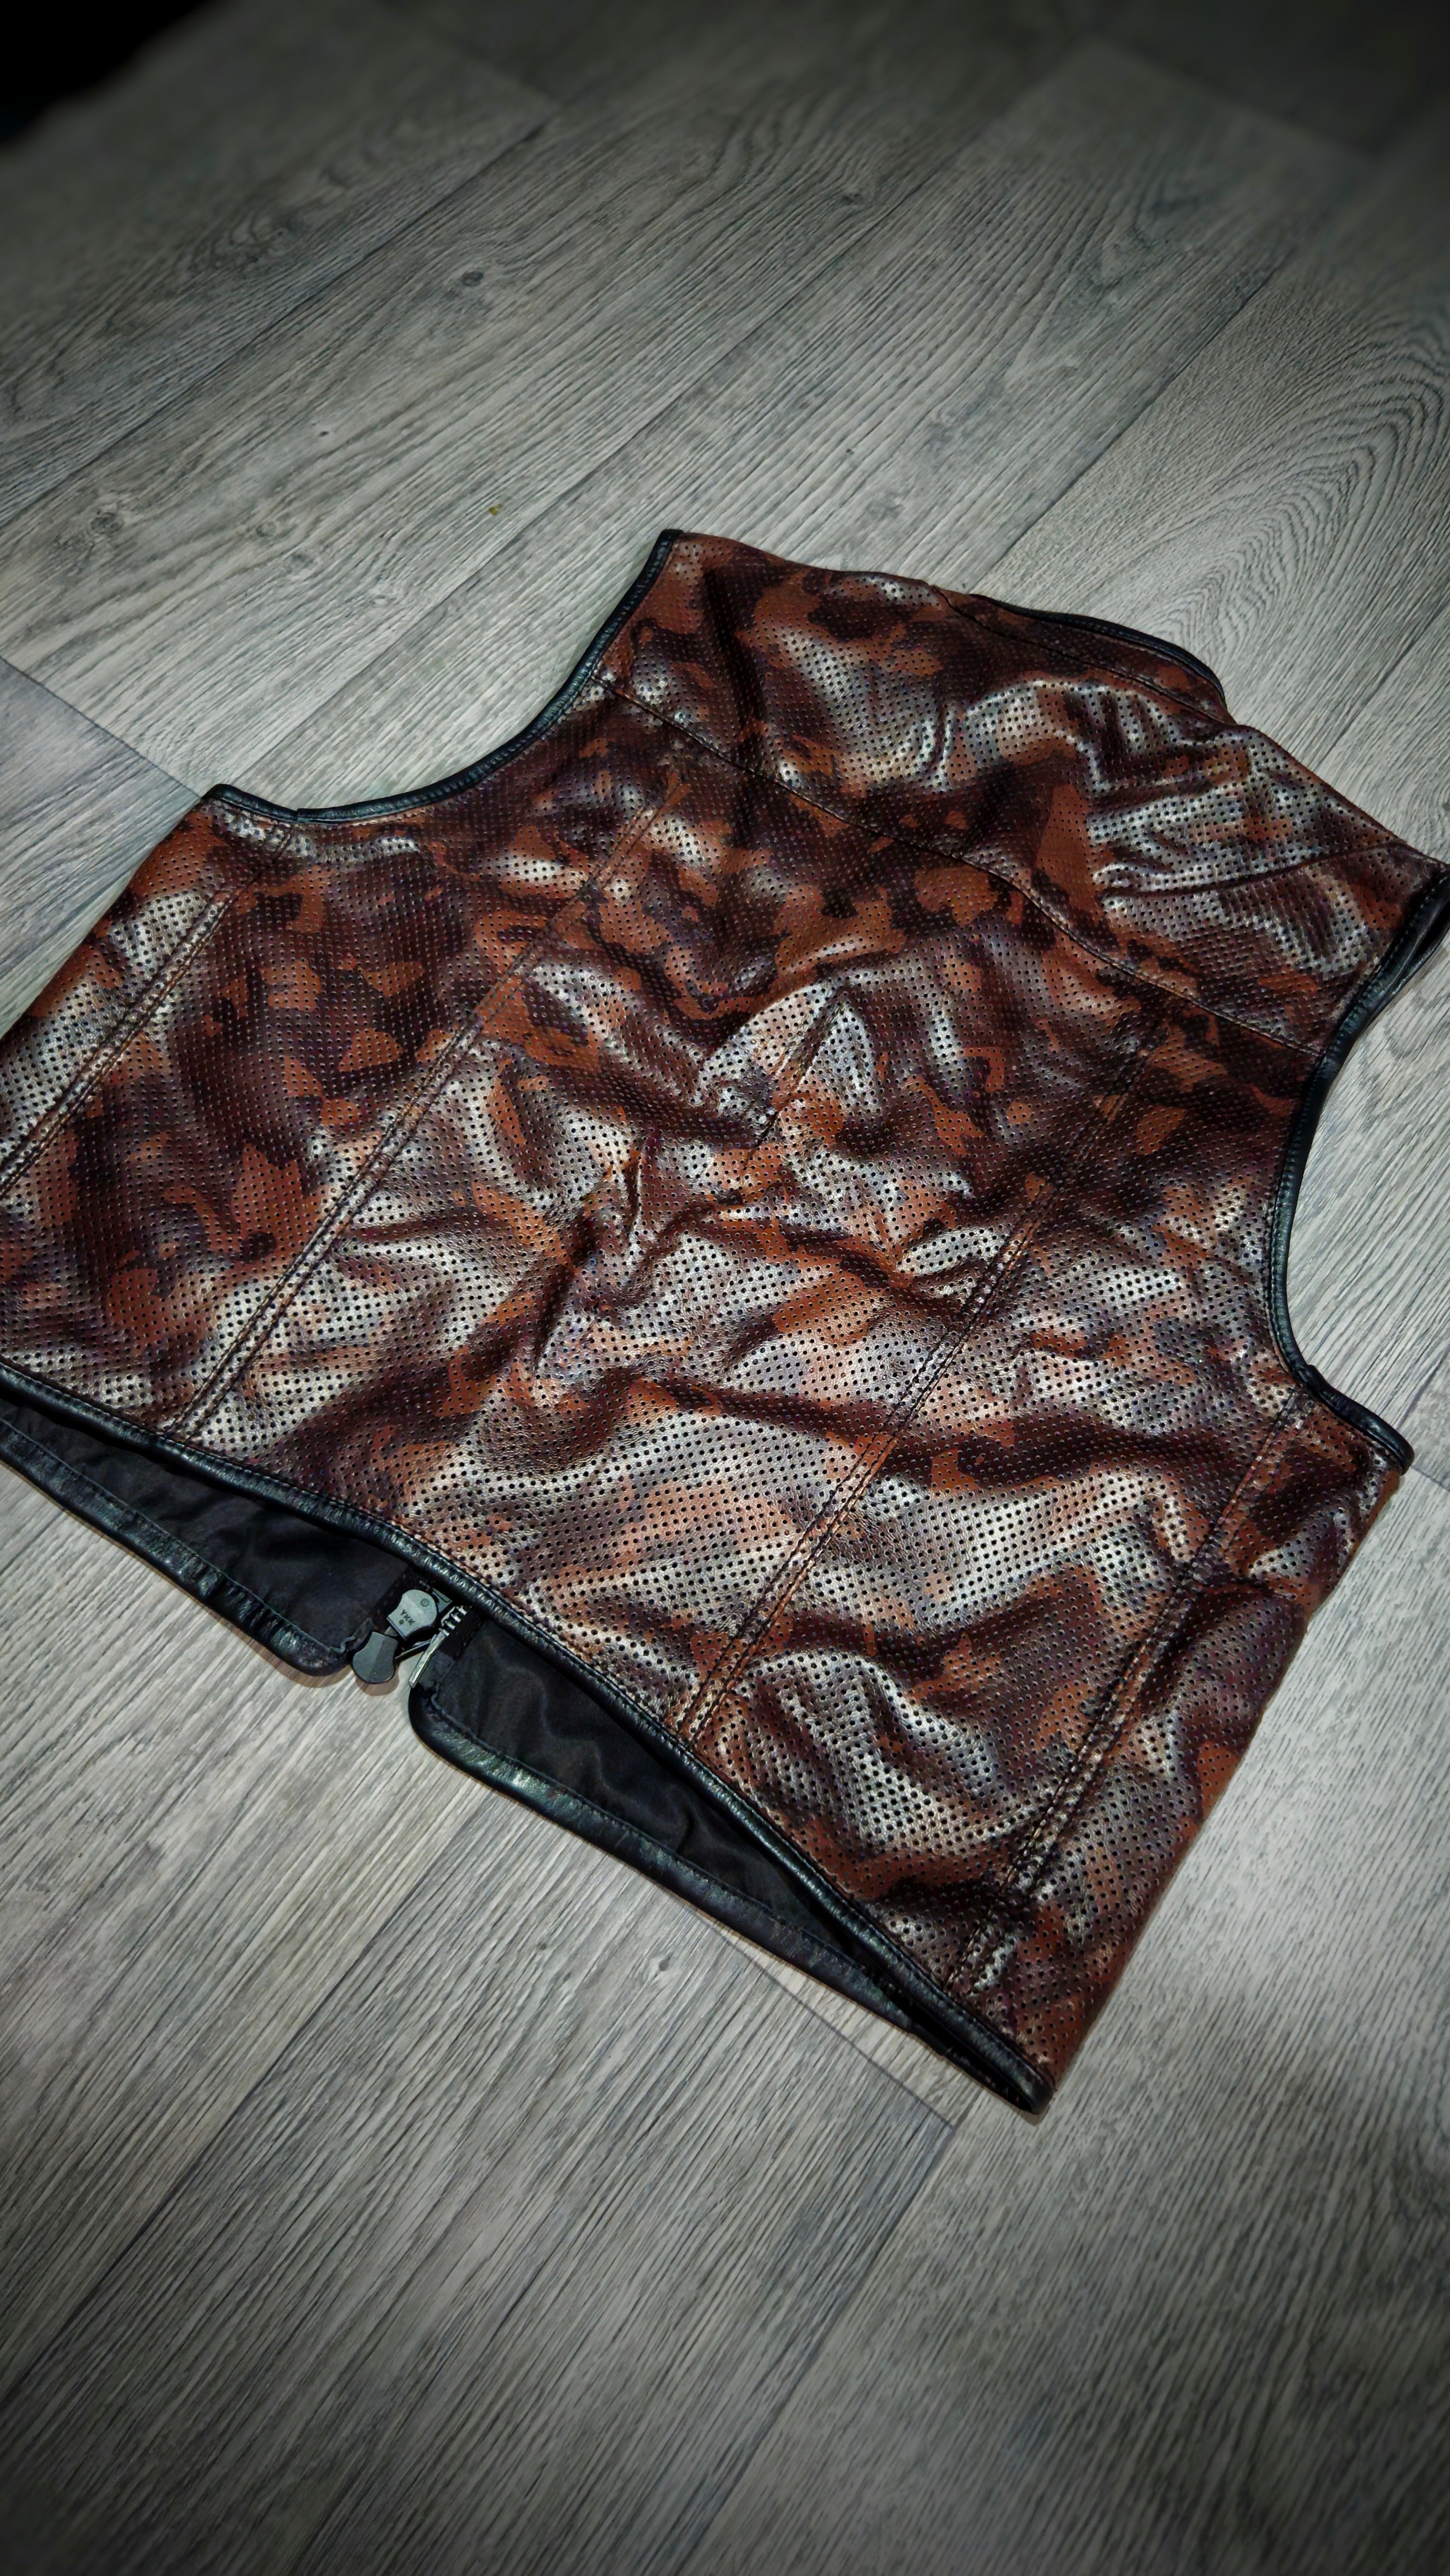 EURO DESERT "OFF THE RACK" PERFORATED CAMO VEST 2.0